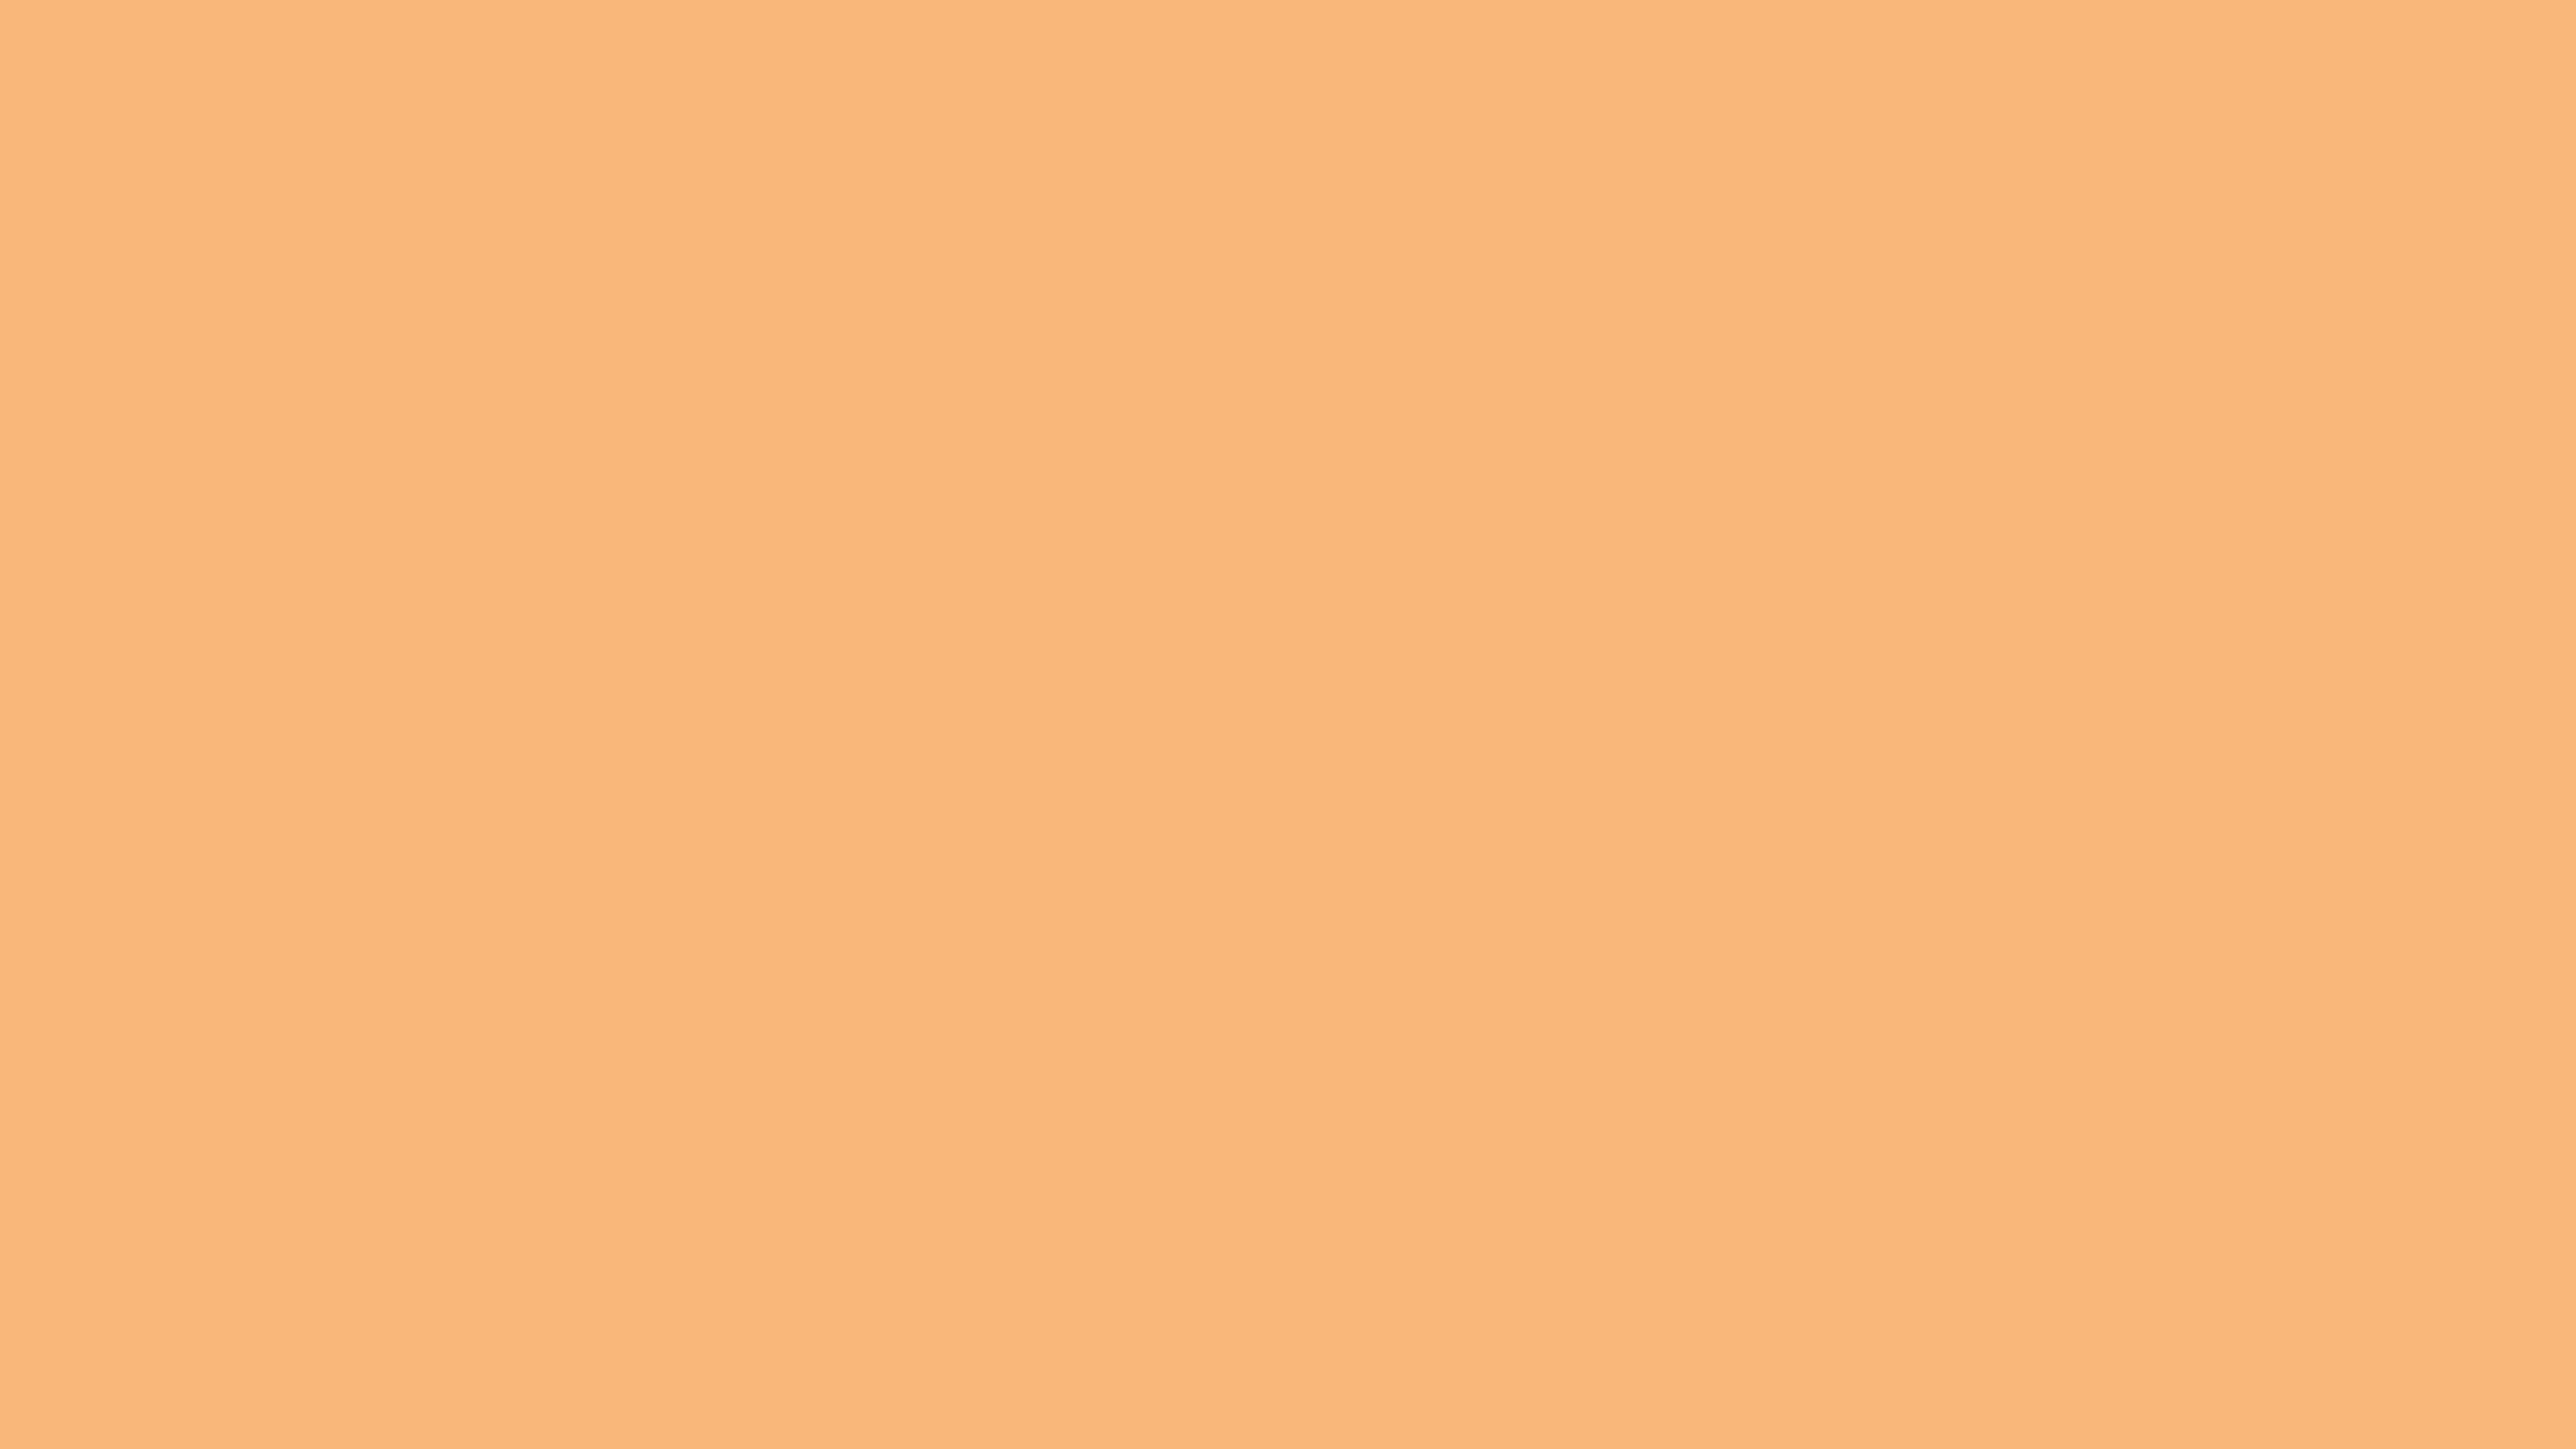 Mellow Apricot Solid Color Background Wallpaper [5120x2880]